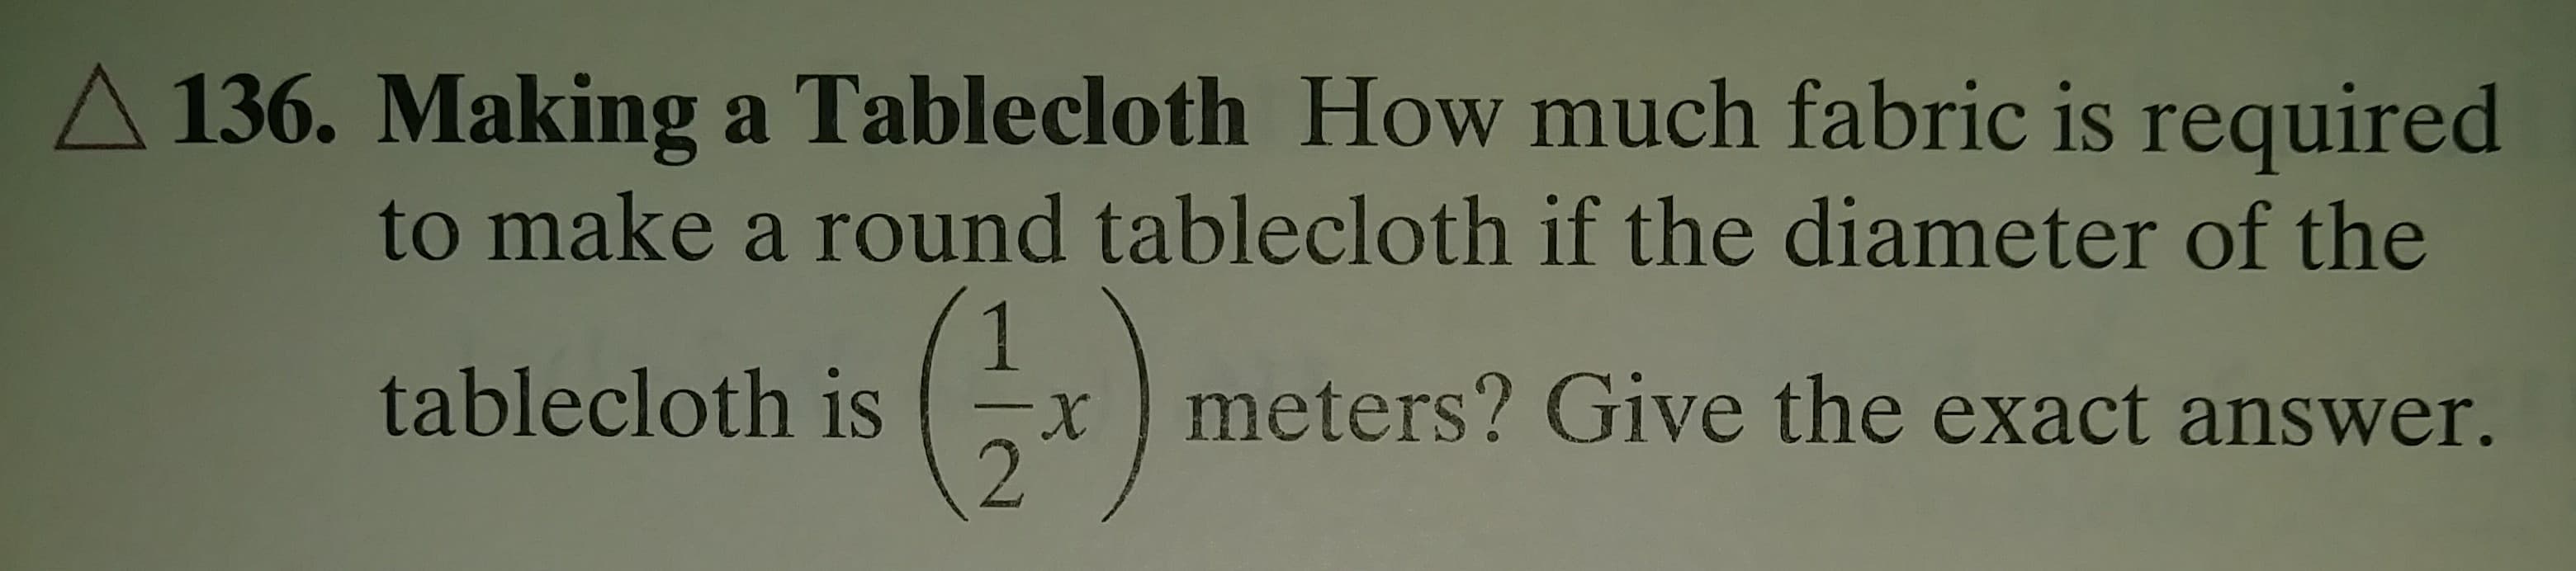 6. Making a Tablecloth How much fabric is required
to make a round tablecloth if the diameter of the
1
tablecloth is
xmeters? Give the exact answer.
X.
2
